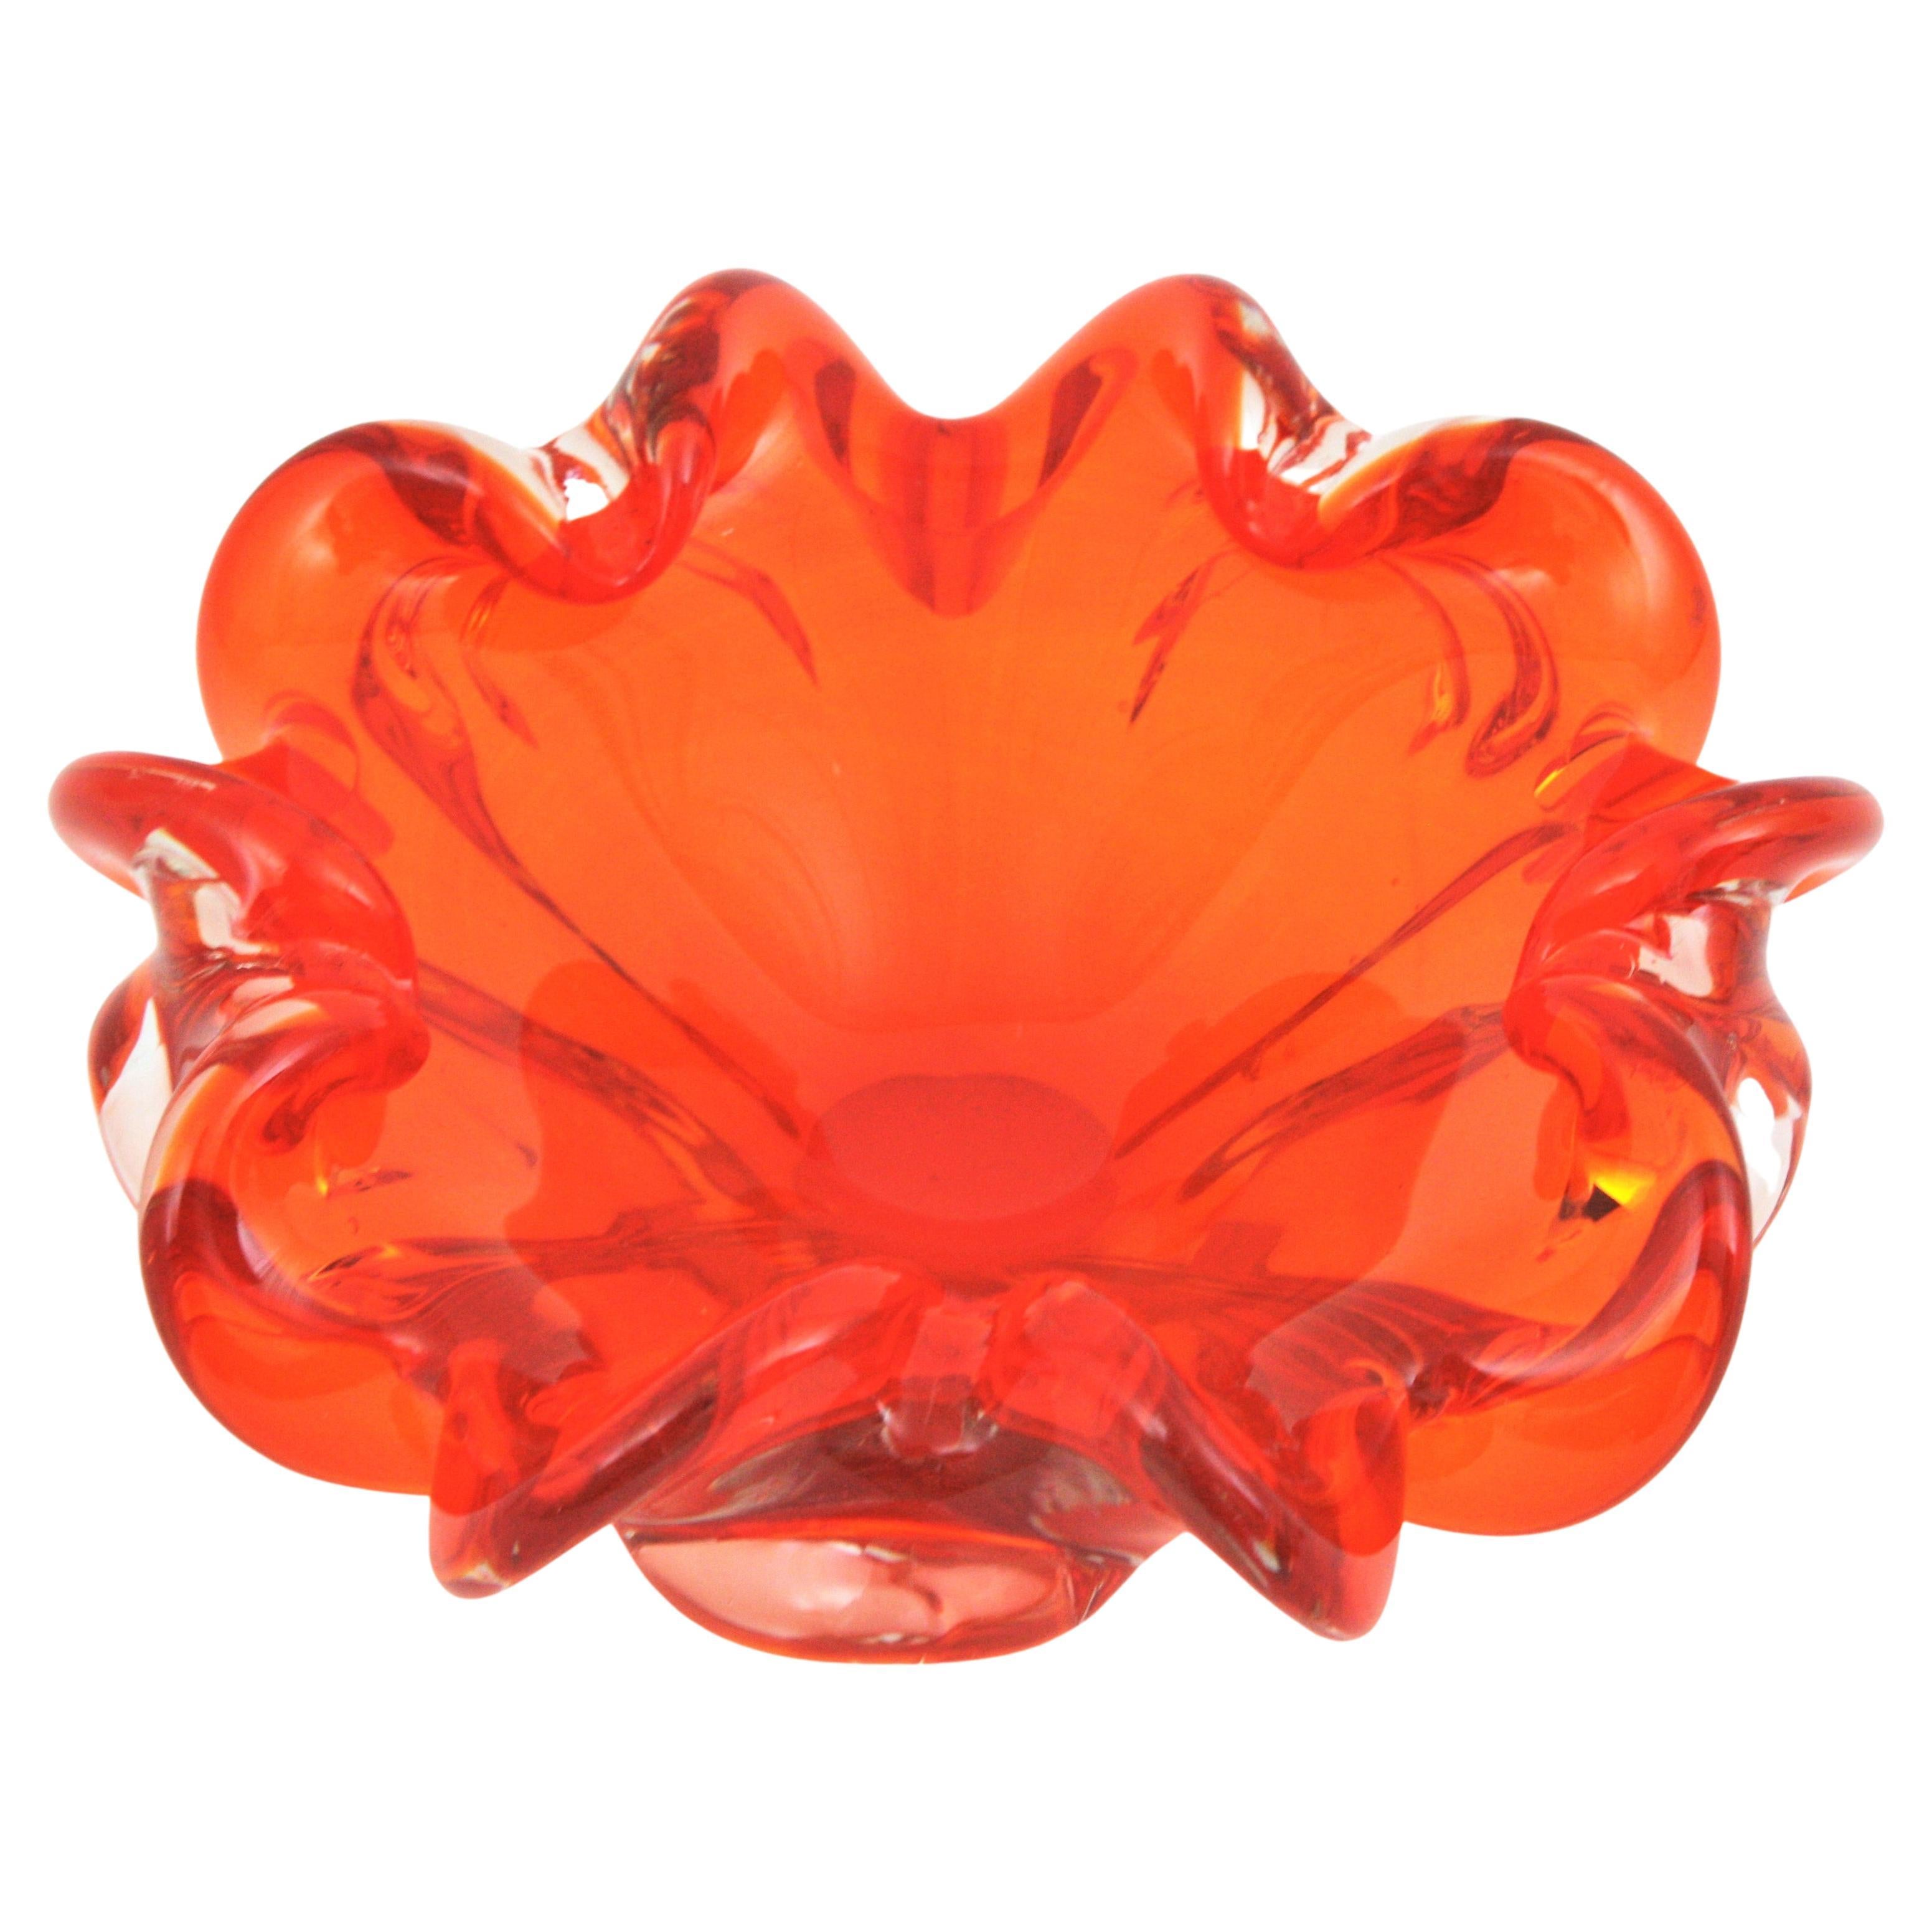 Mid-Century Modern Midcentury Italian Murano Sommerso Orange and Clear Art Glass Bowl / Ashtray For Sale